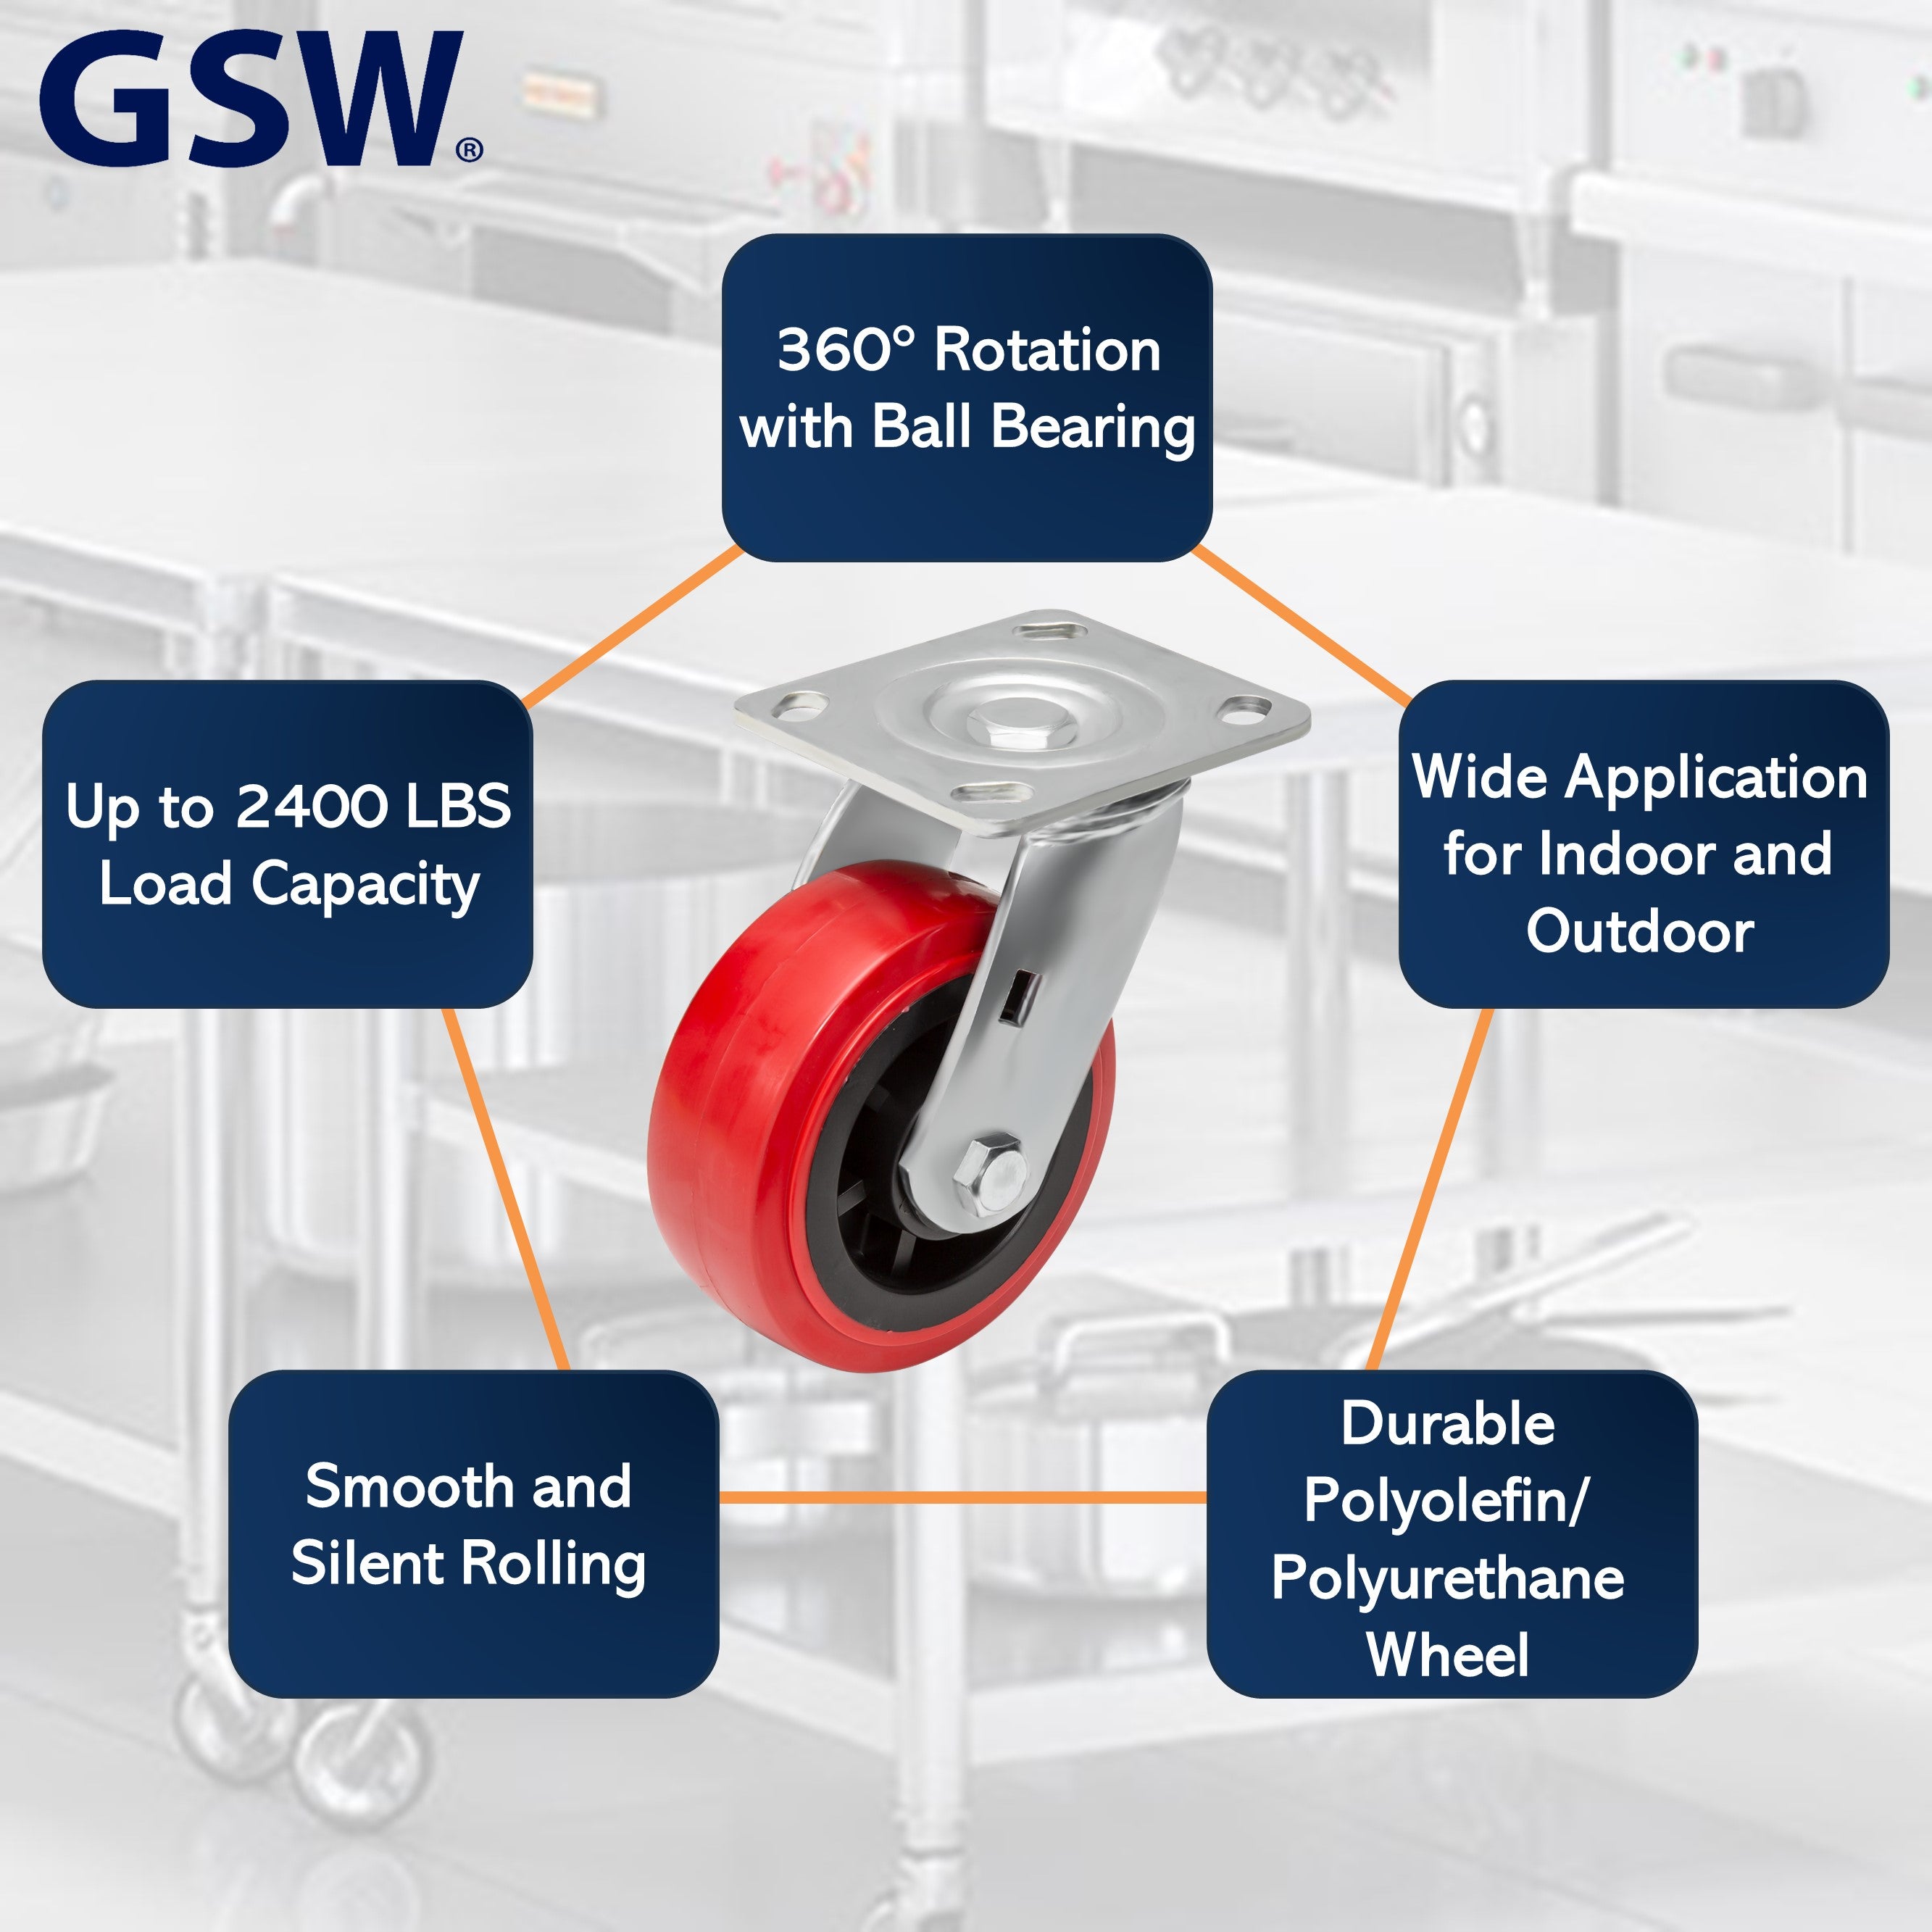 GSW 5" Industrial Casters - Heavy Duty Casters, Set of 4 Plate Casters with Loading Capacity of 2400 Lbs, Use for Heavy Equipment, Carts, and Workbench (4 Swivels)